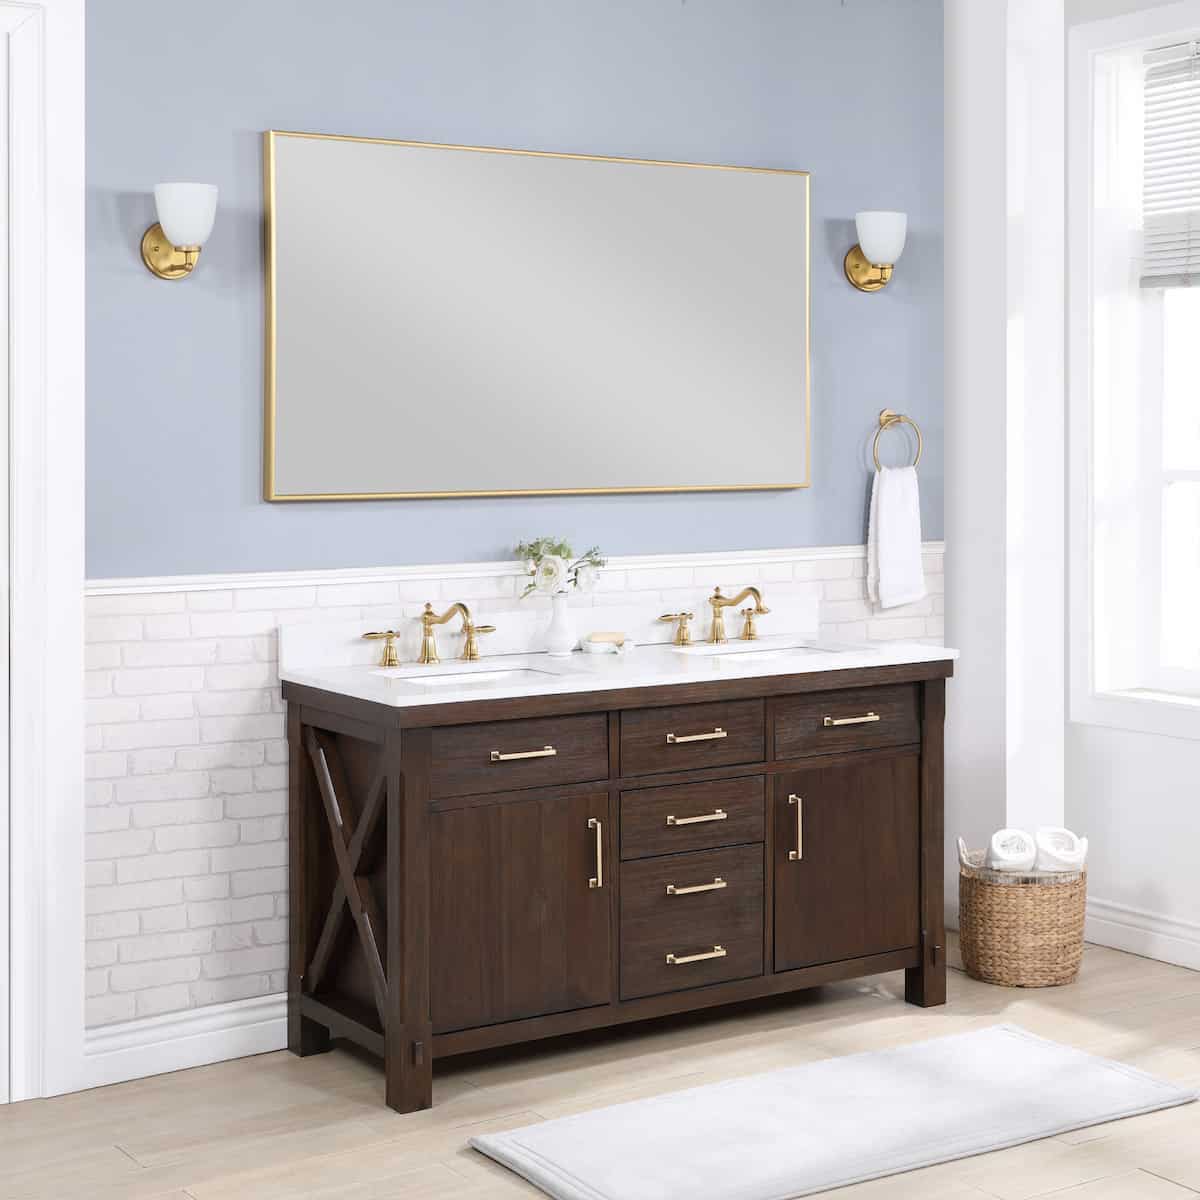 Vinnova Viella 60 Inch Double Sink Bath Vanity in Deep Walnut with White Composite Countertop With Mirror Side 701860-DW-WS